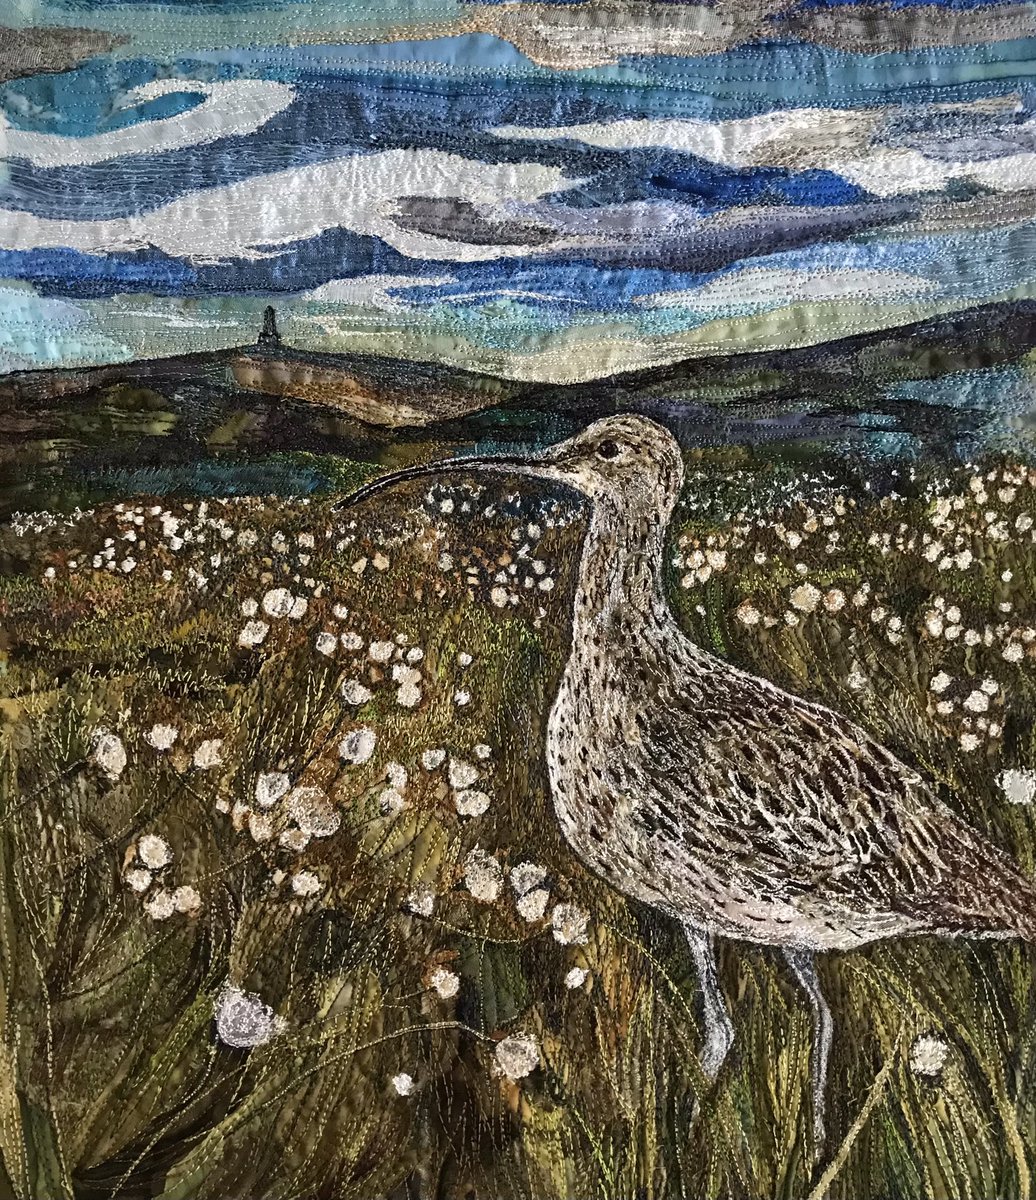 Finally finished this commission piece of a curlew in cotton grass. #stitchedart #embroideredtextileart #textileartist #machineembroidery #fabricandstitch #curlew #freemotionembroidery